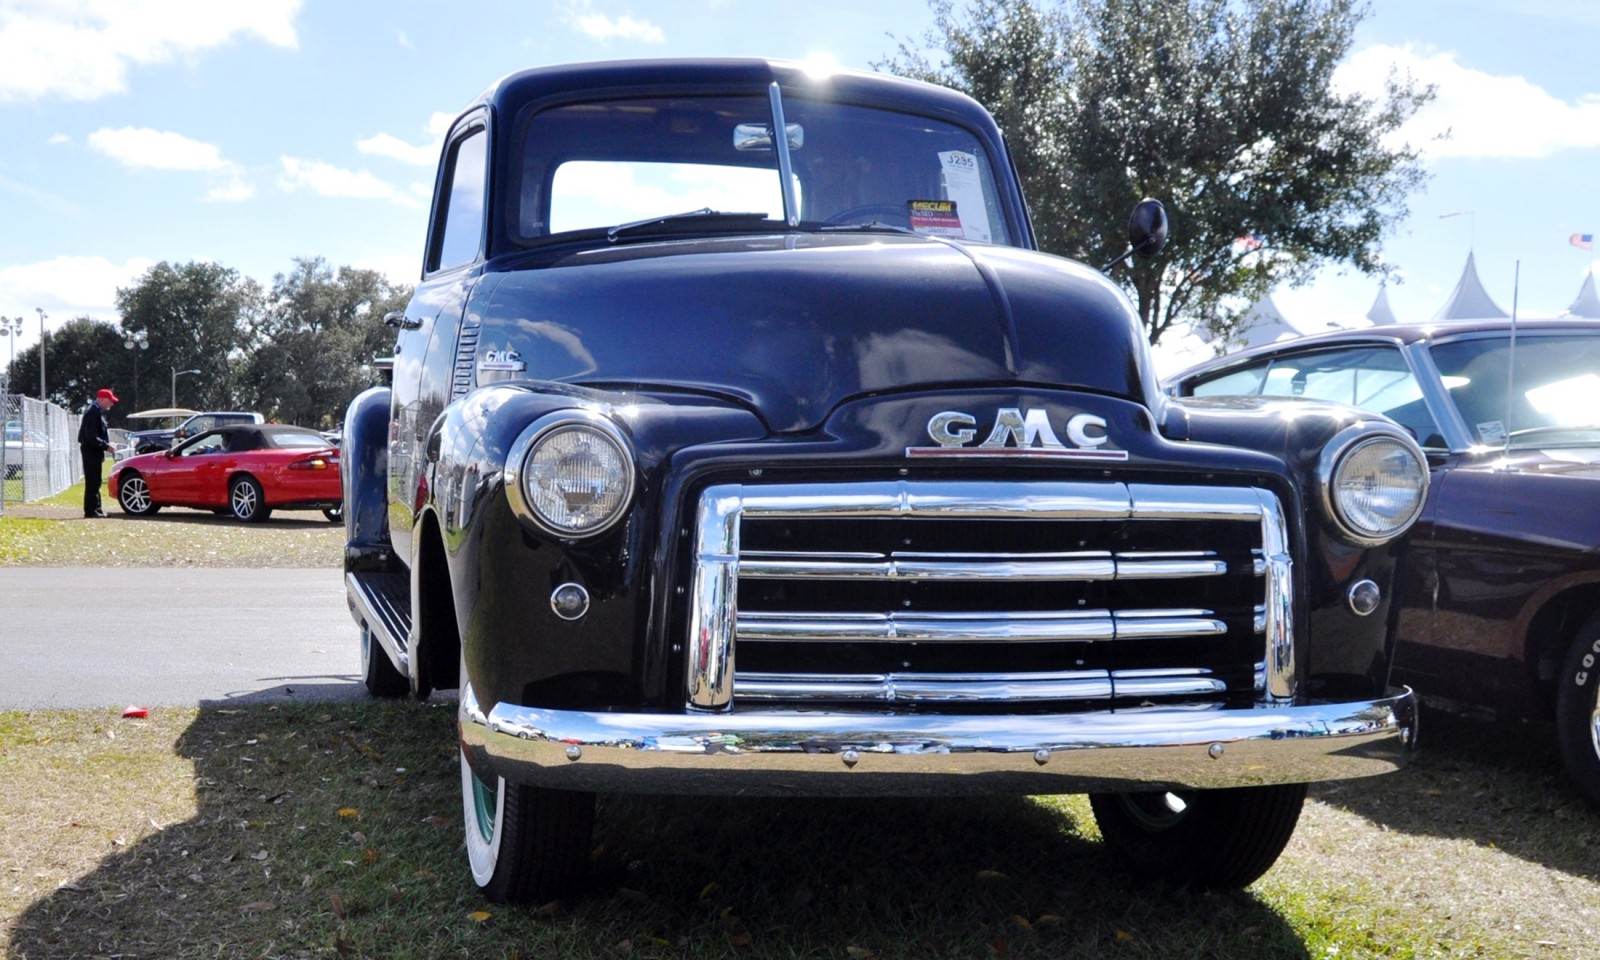 1946 Gmc Pickup Parts Pictures to Pin on Pinterest  PinsDaddy